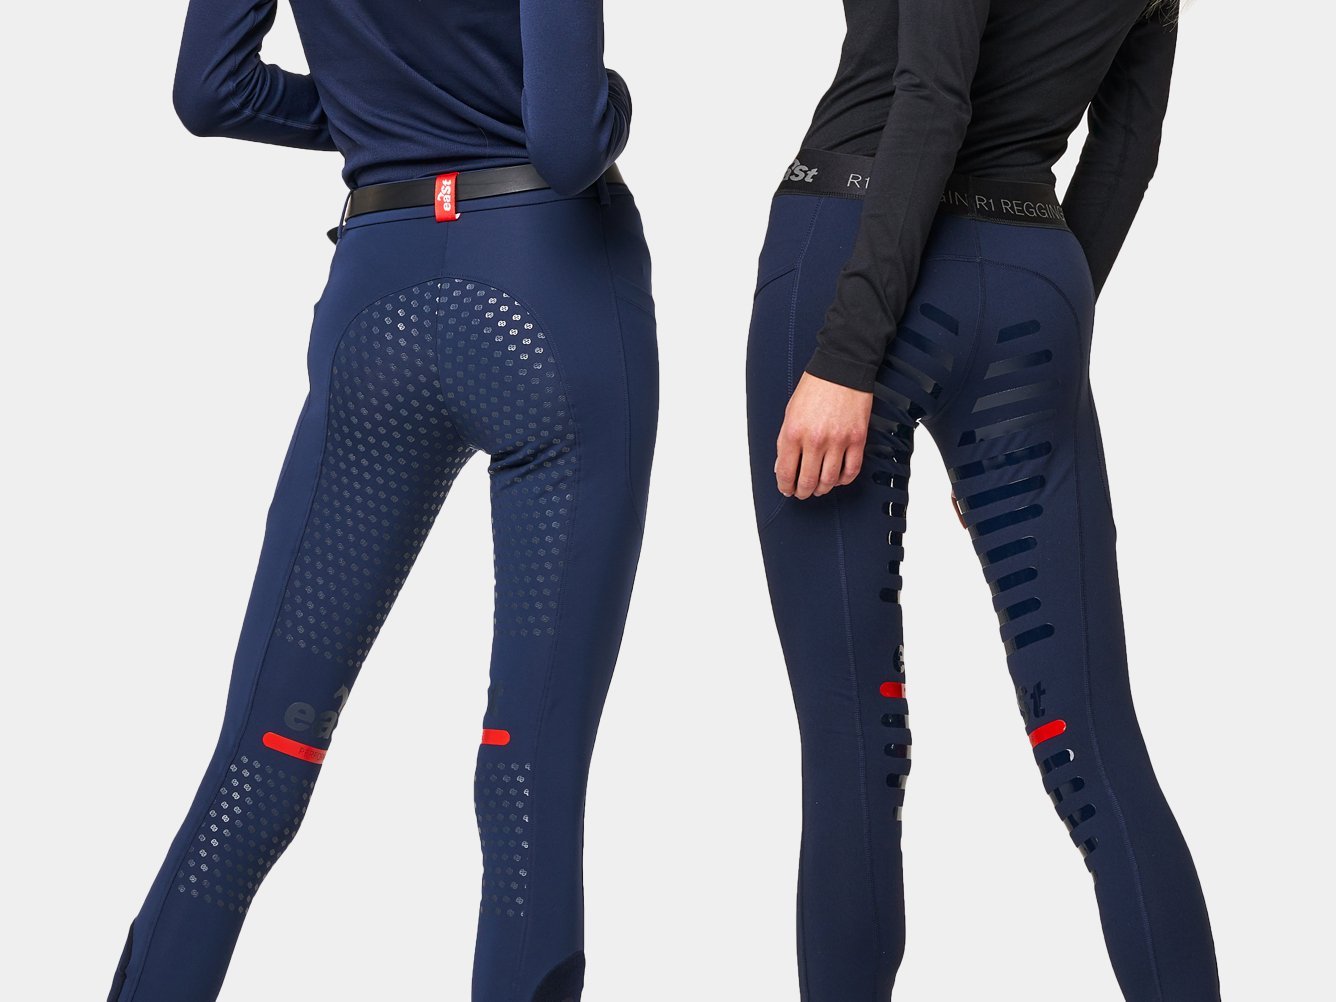 How to know when wearing breeches or ridingleggings?